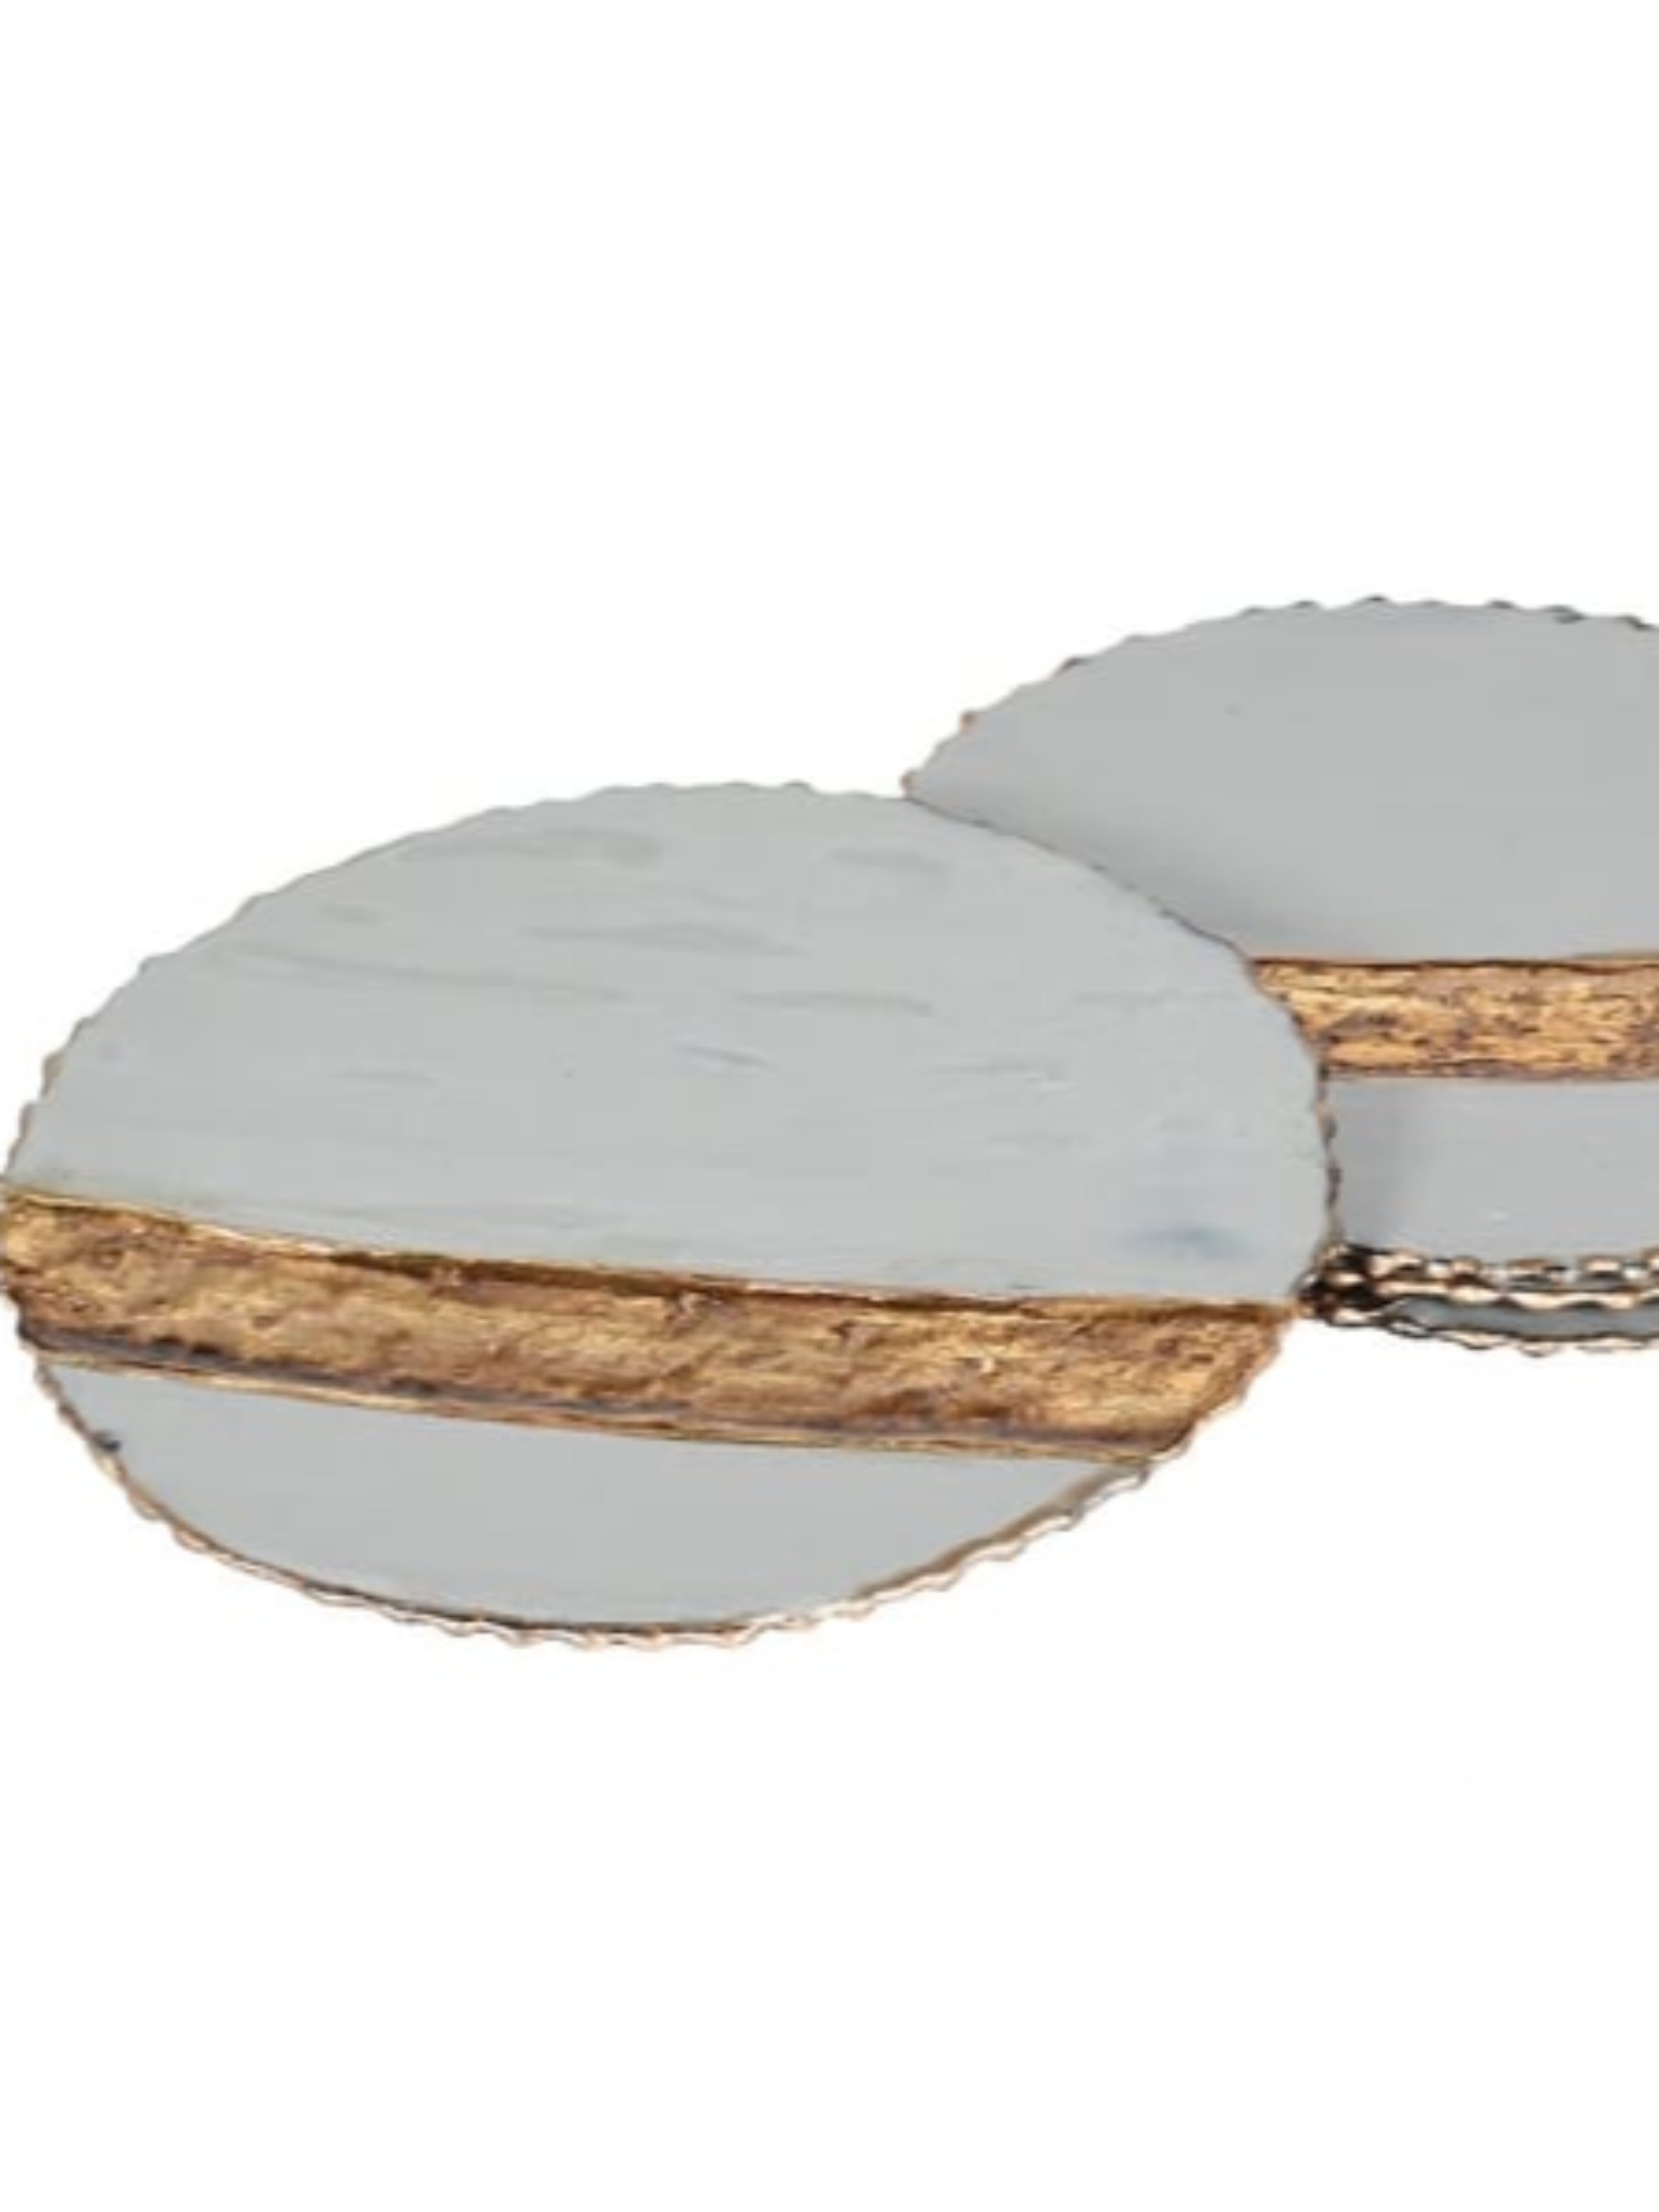 Set of Four Grey Enamel Coasters with Gold Detailing